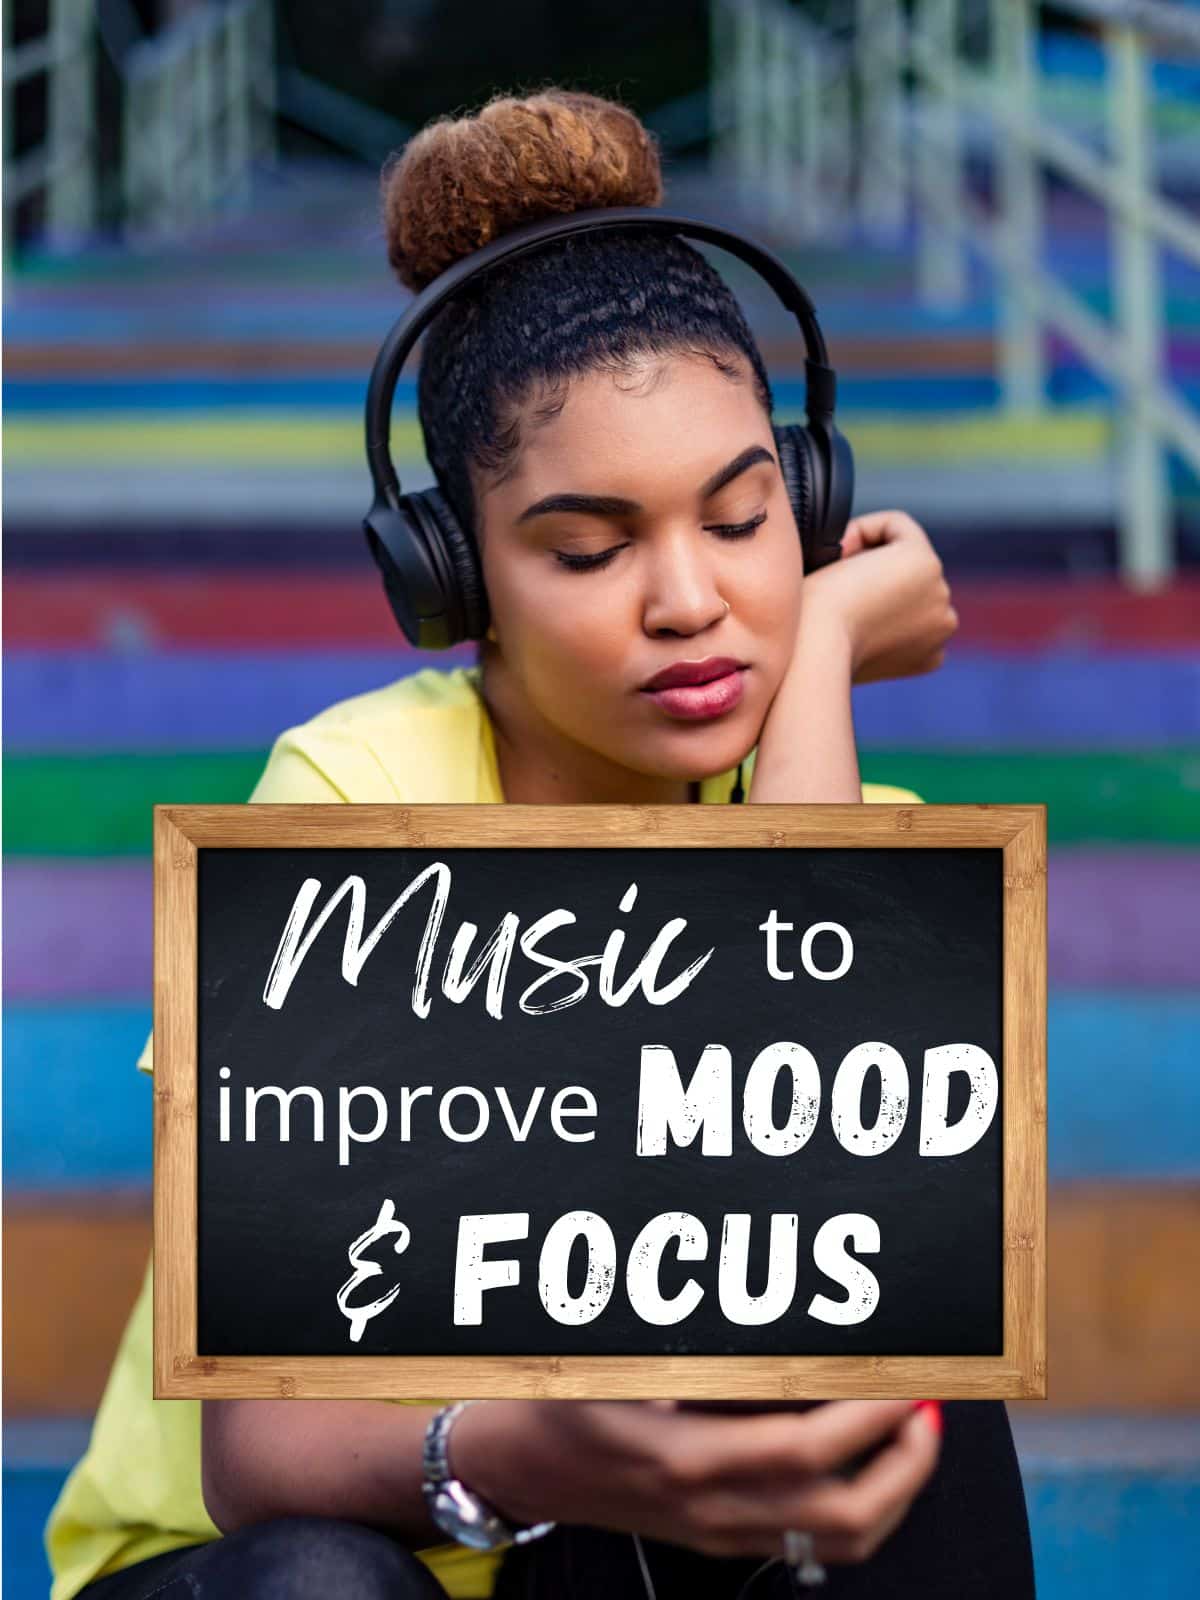 A woman with headphones on listening to music and the text "Music to improve mood & focus."